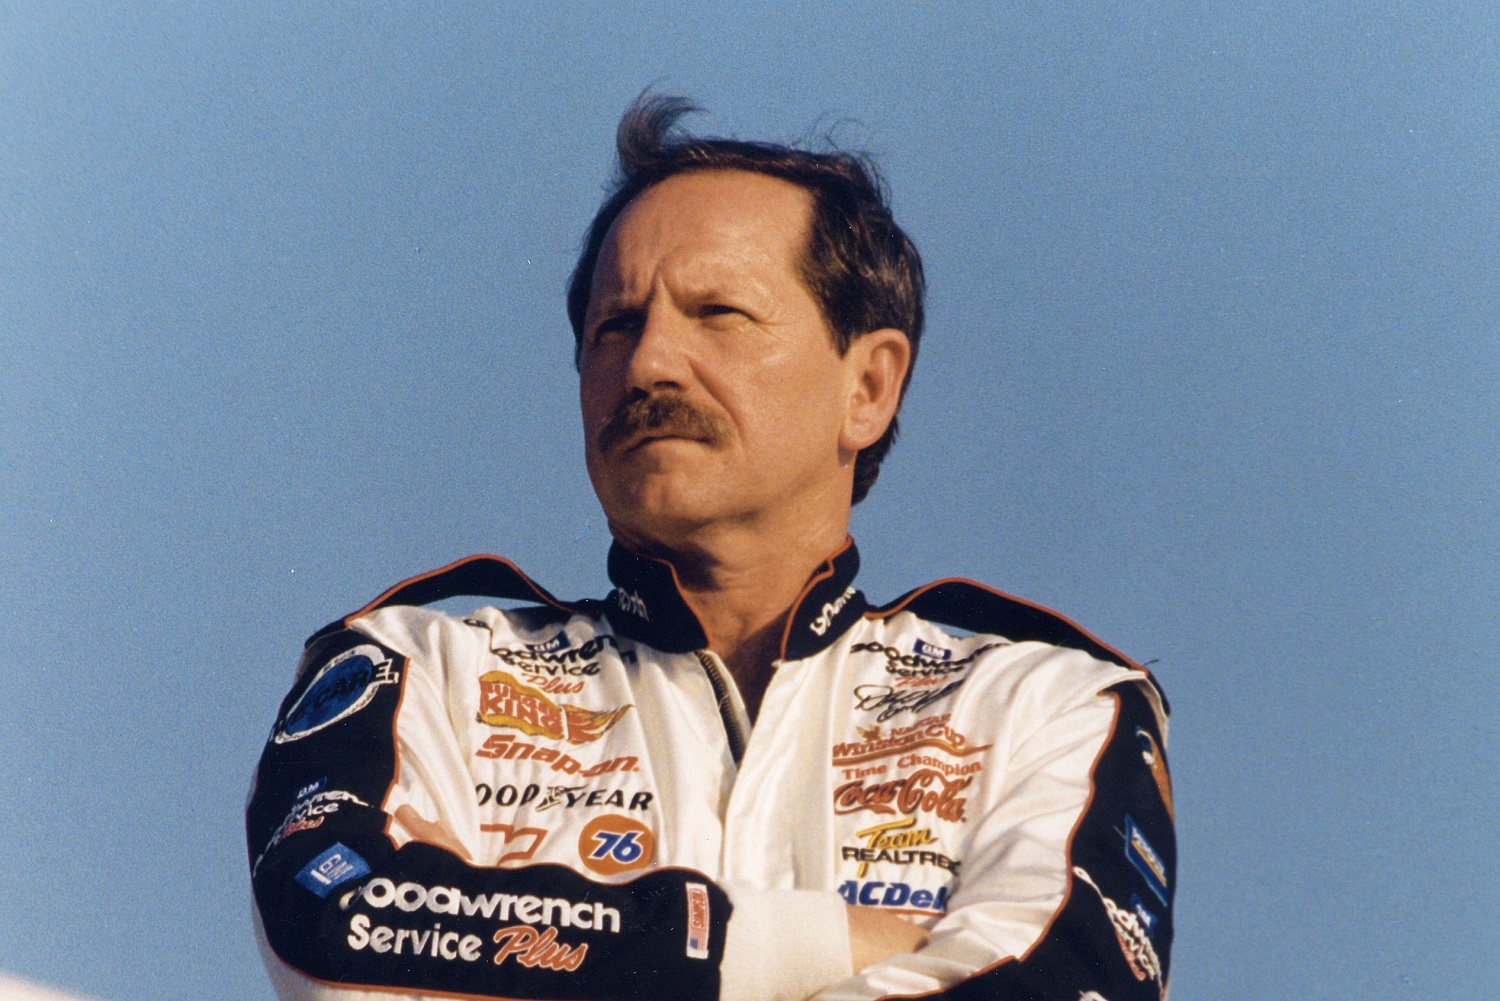 Dale Earnhardt, driver of the No. 3 Chevy, looks on before a race circa 1990.